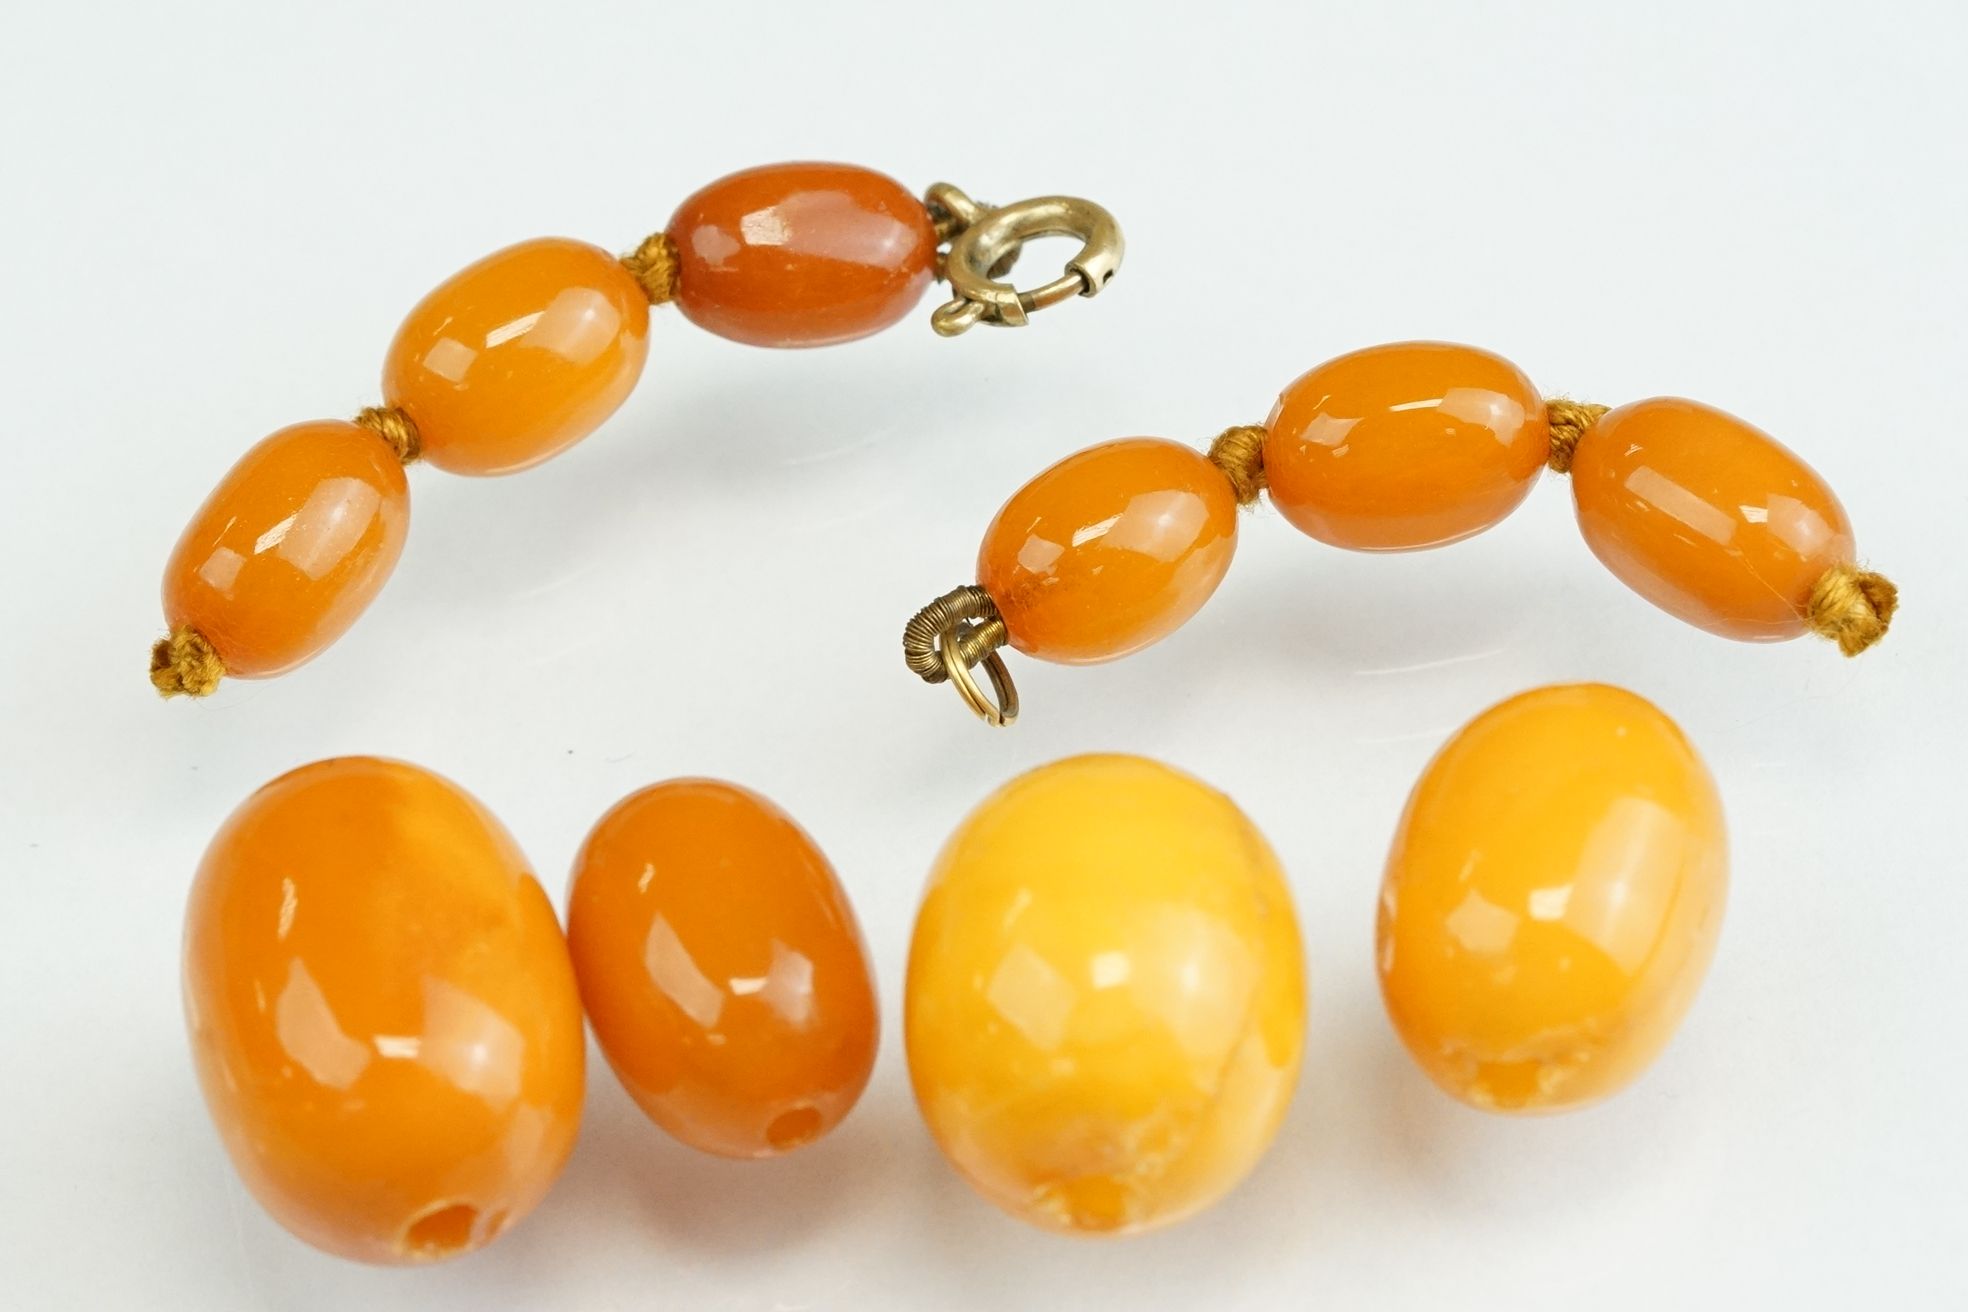 Ten amber type beads, the largest measuring approx 20mm x 14mmm, the smallest measuring approx 10.